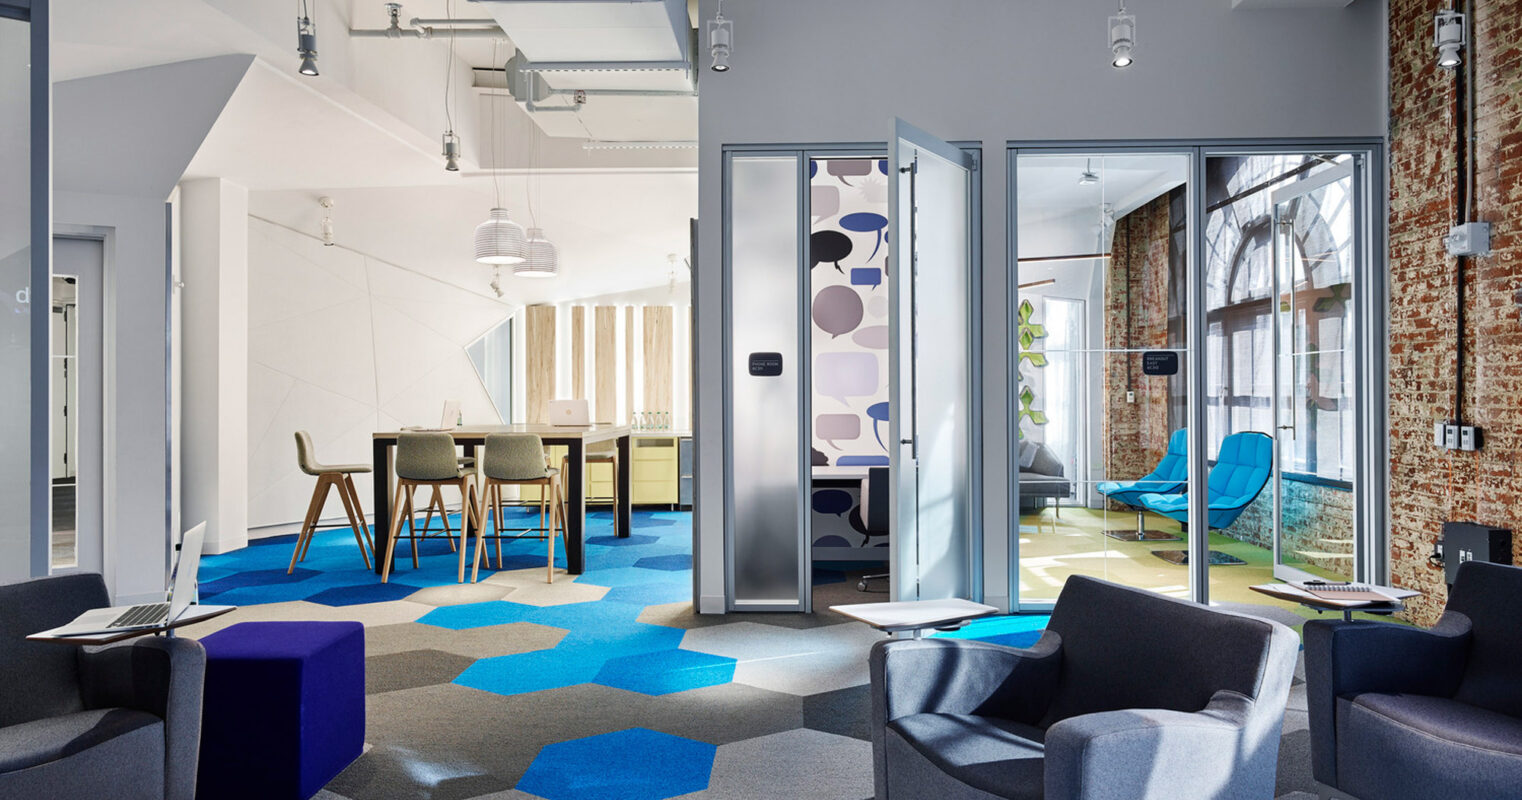 Modern office space blending industrial and contemporary design, featuring exposed brick walls, geometric carpet patterns, sleek furniture, glass partitions, and an eclectic mix of blue and neutral tones for a dynamic work environment.